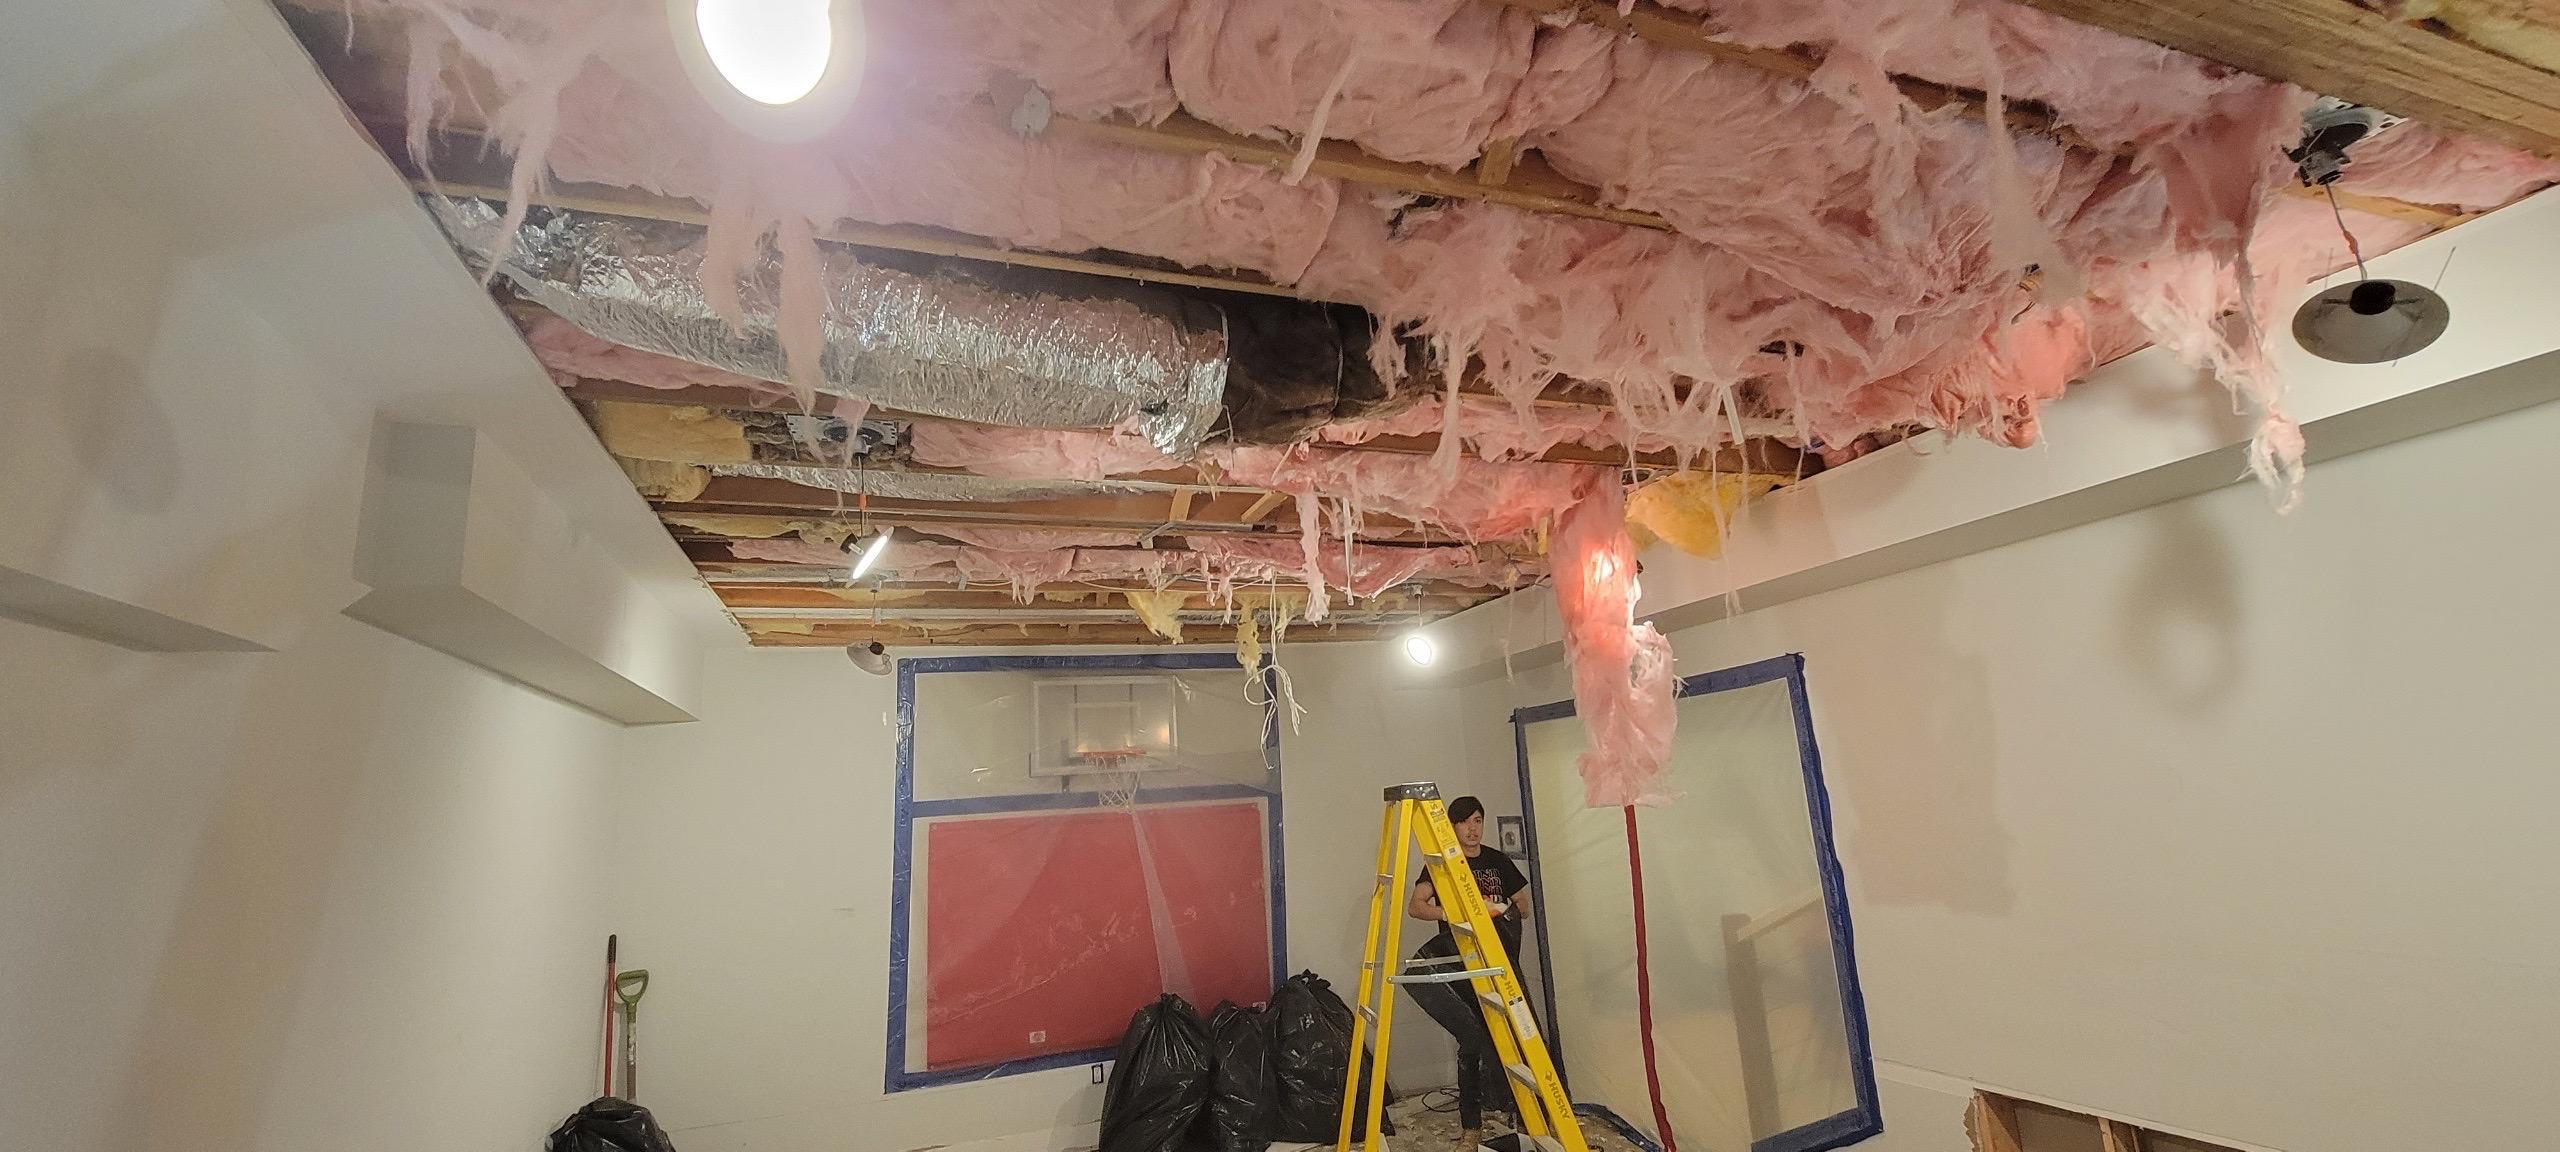 Indoor basketball court gets ruined by water damage in Mt. Vernon, NY